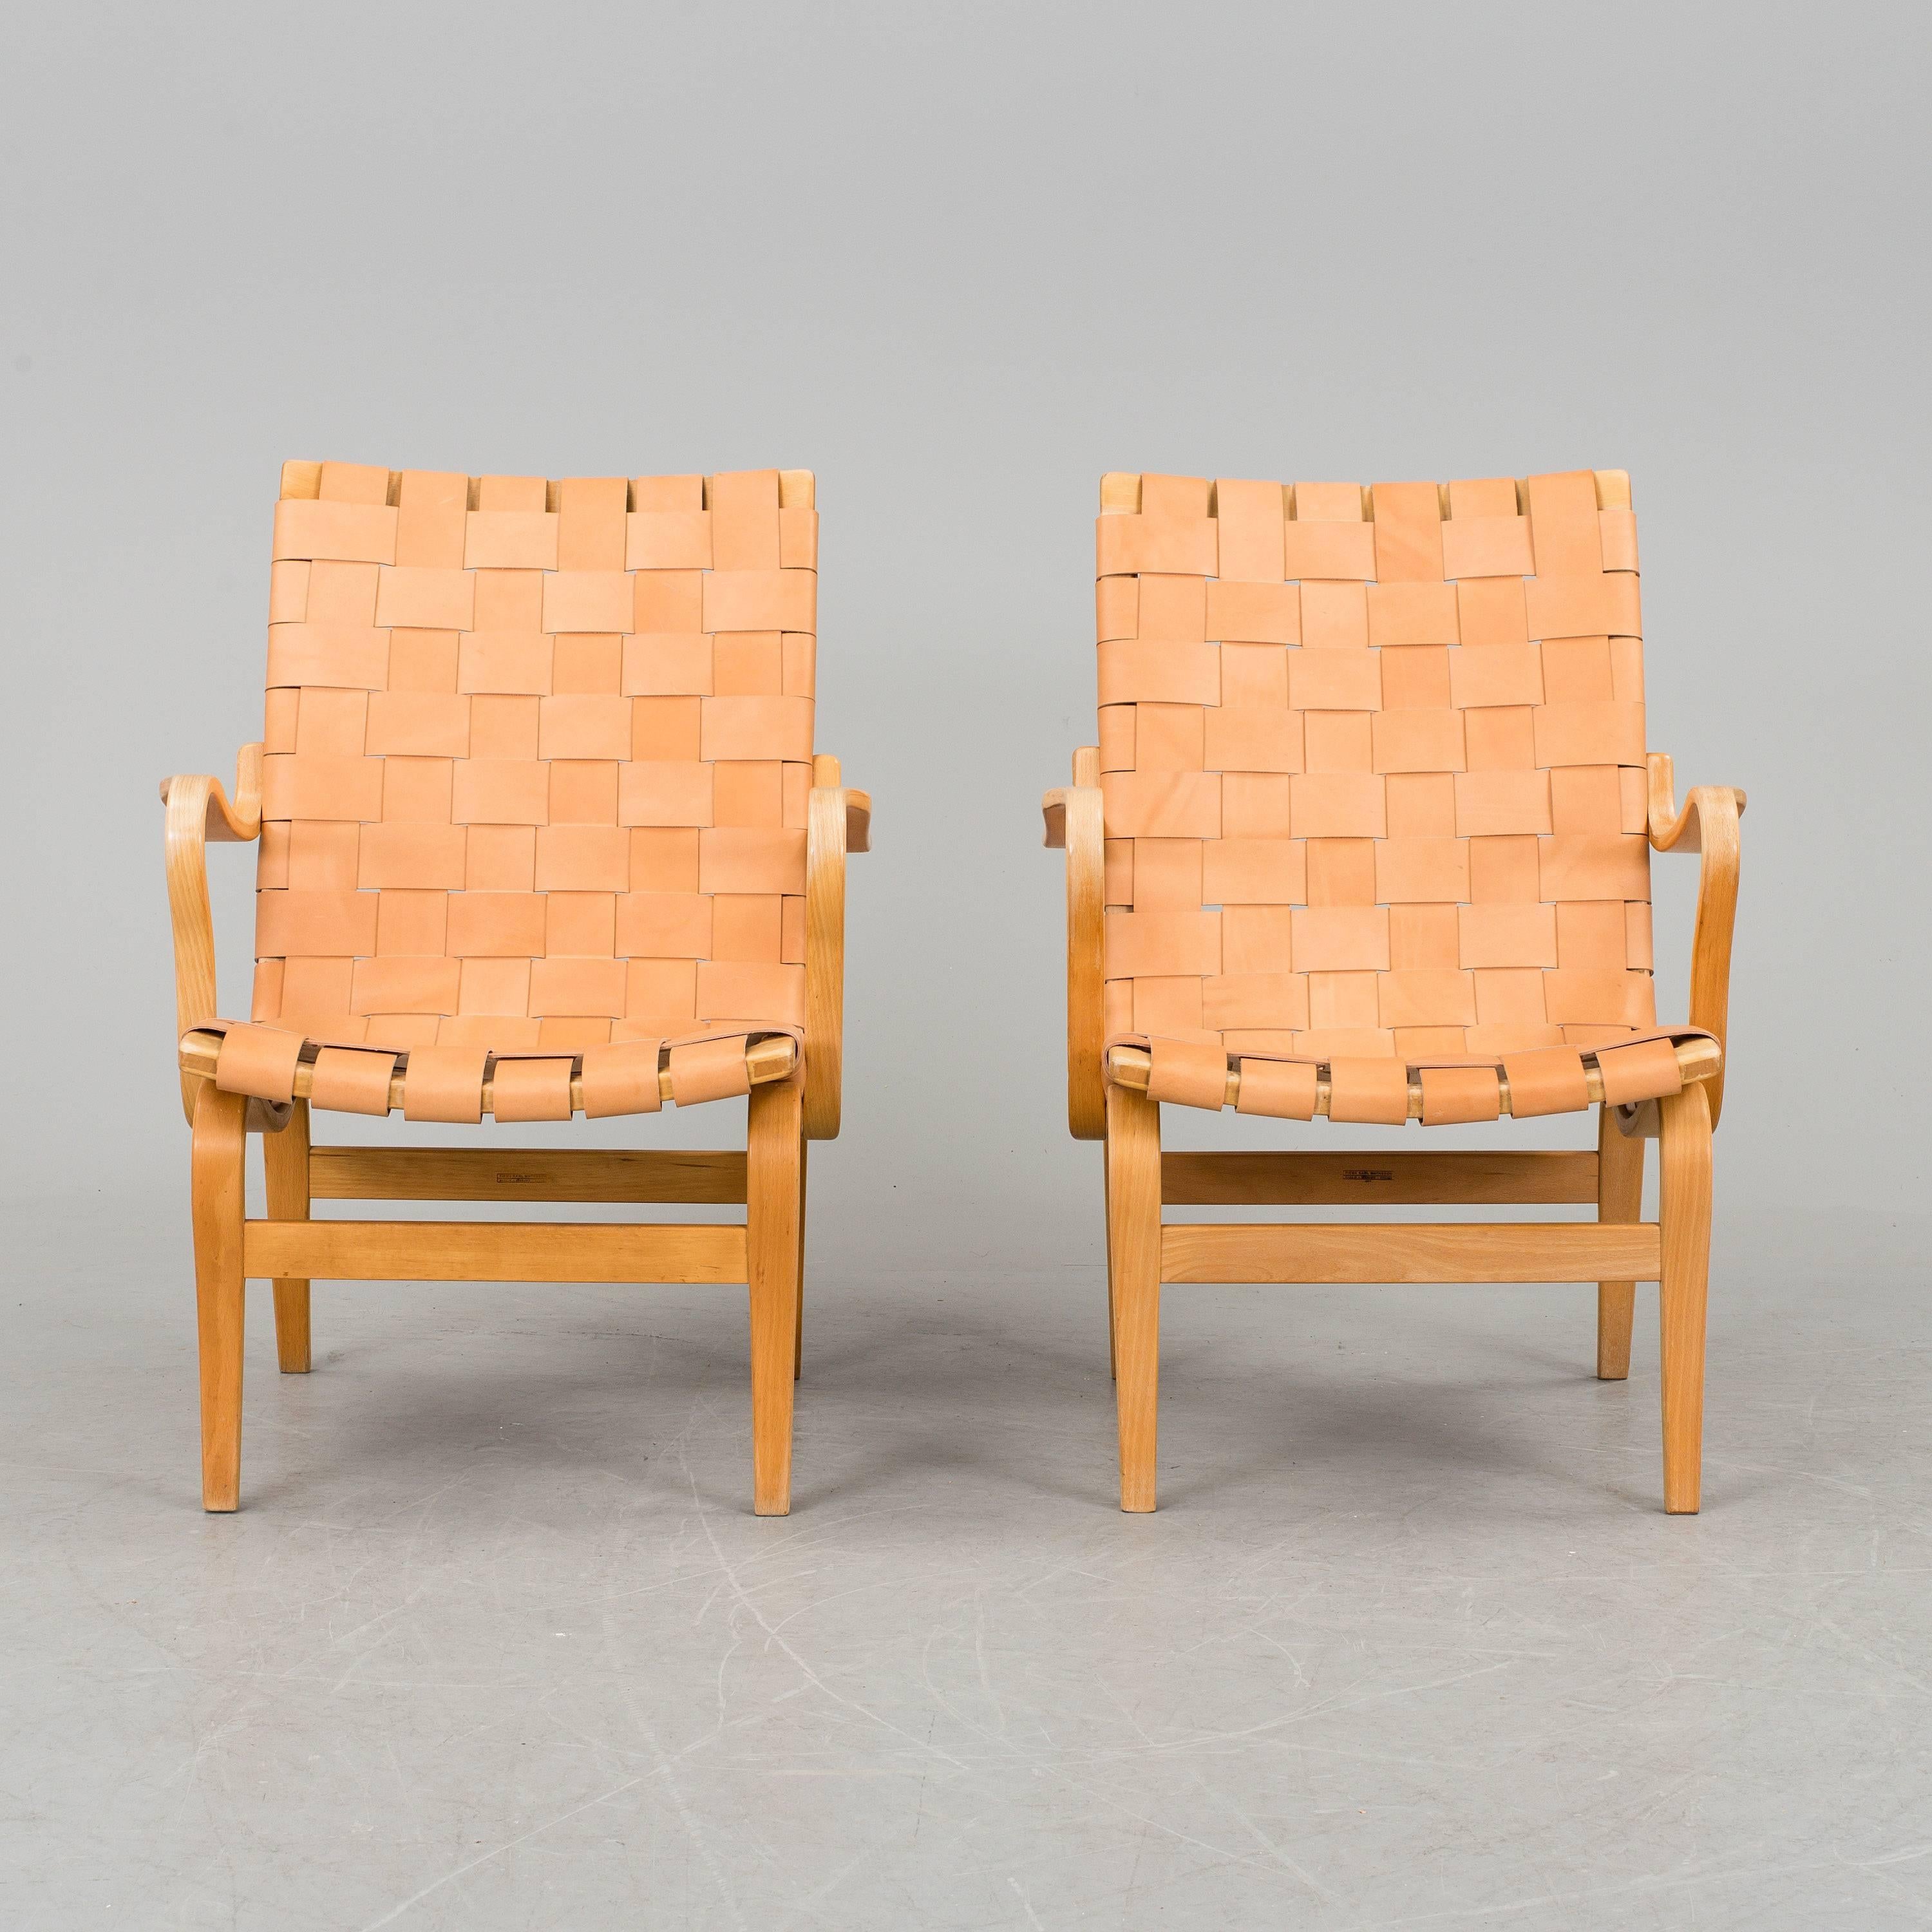 A beautiful pair of 'Eva' armchairs with leather by Bruno Mathsson for Firma Karl Mathsson, Värnamo.
  